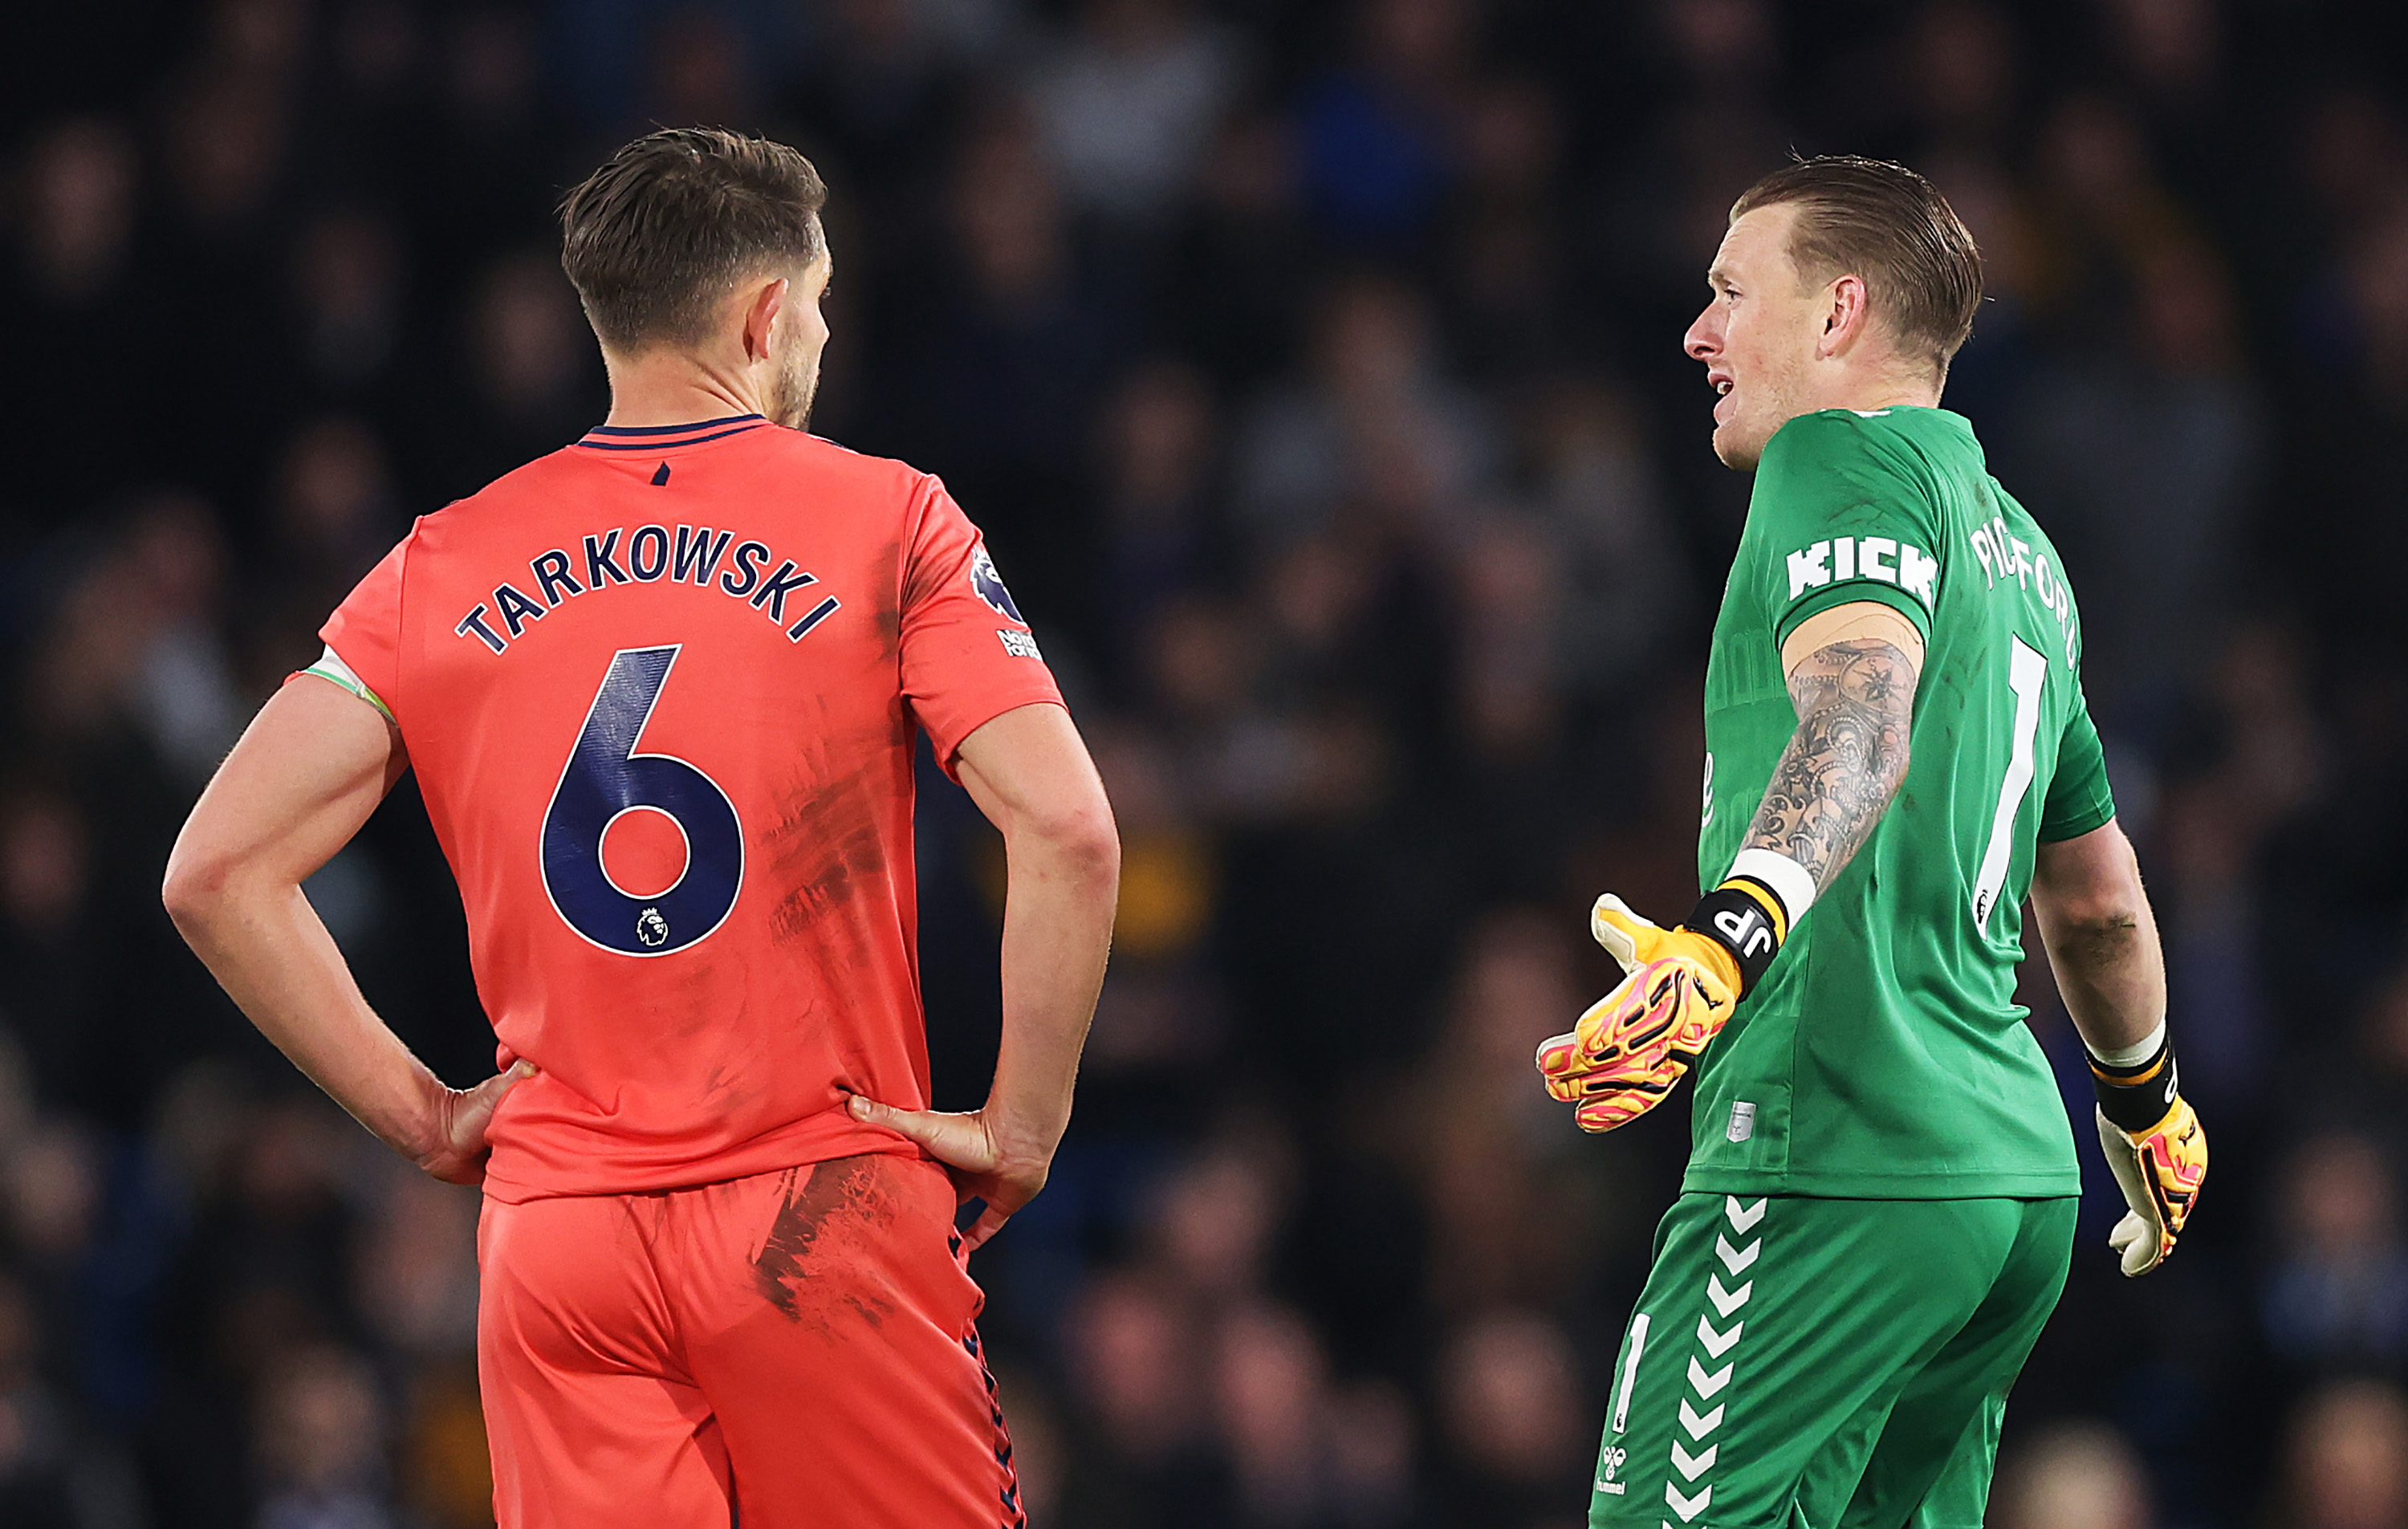 “This is the most embarrassed I have felt” – Everton player brutally honest after Chelsea thrashing